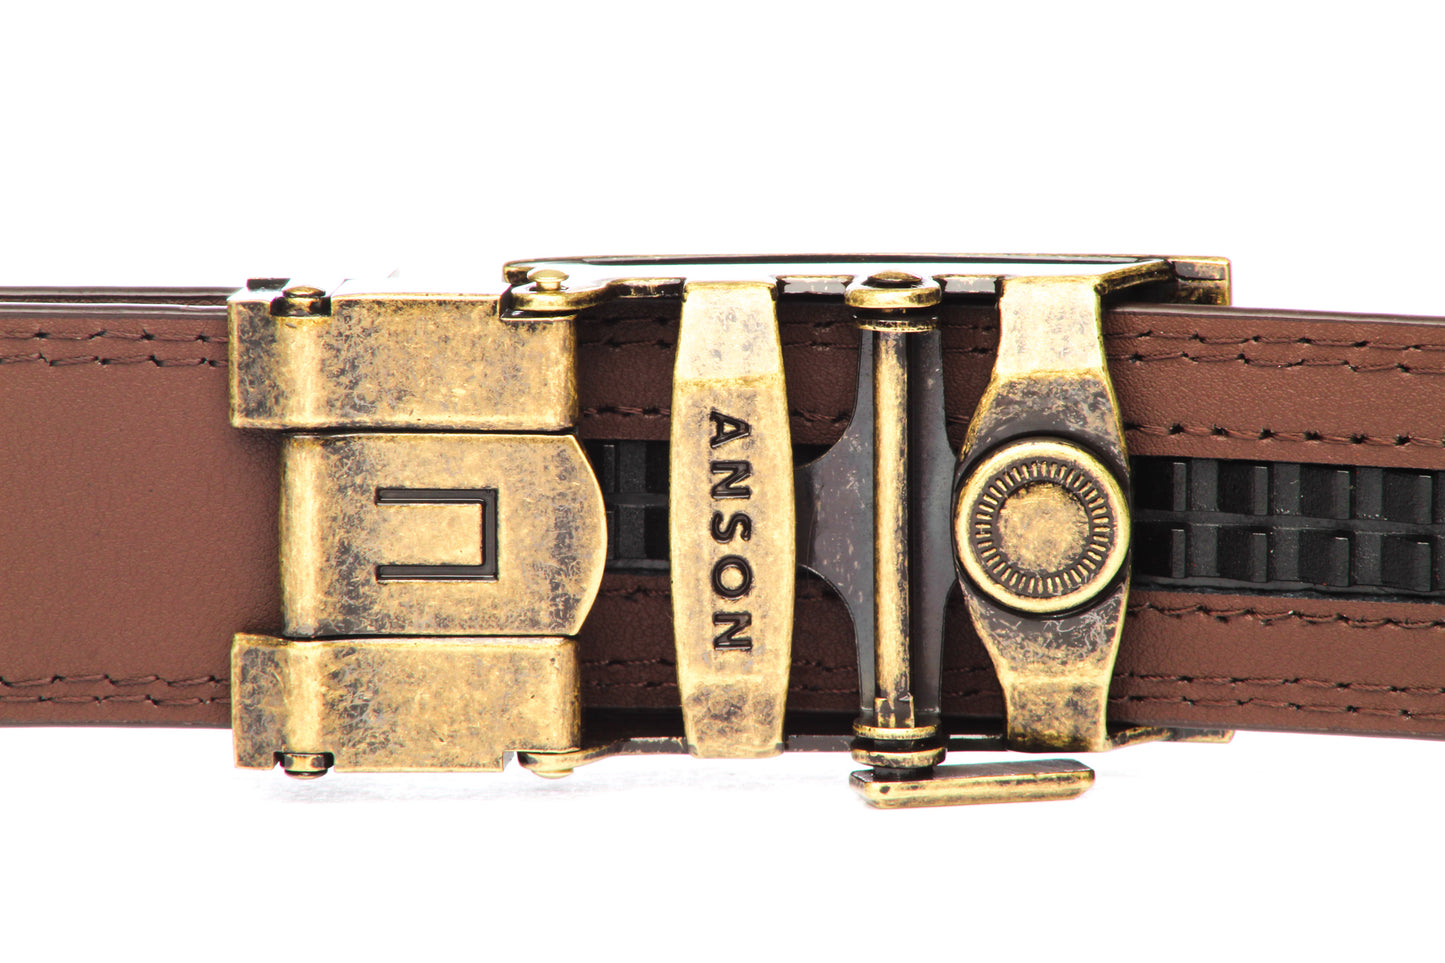 Men's traditional ratchet belt buckle in antiqued gold with a 1.25-inch width, back view.